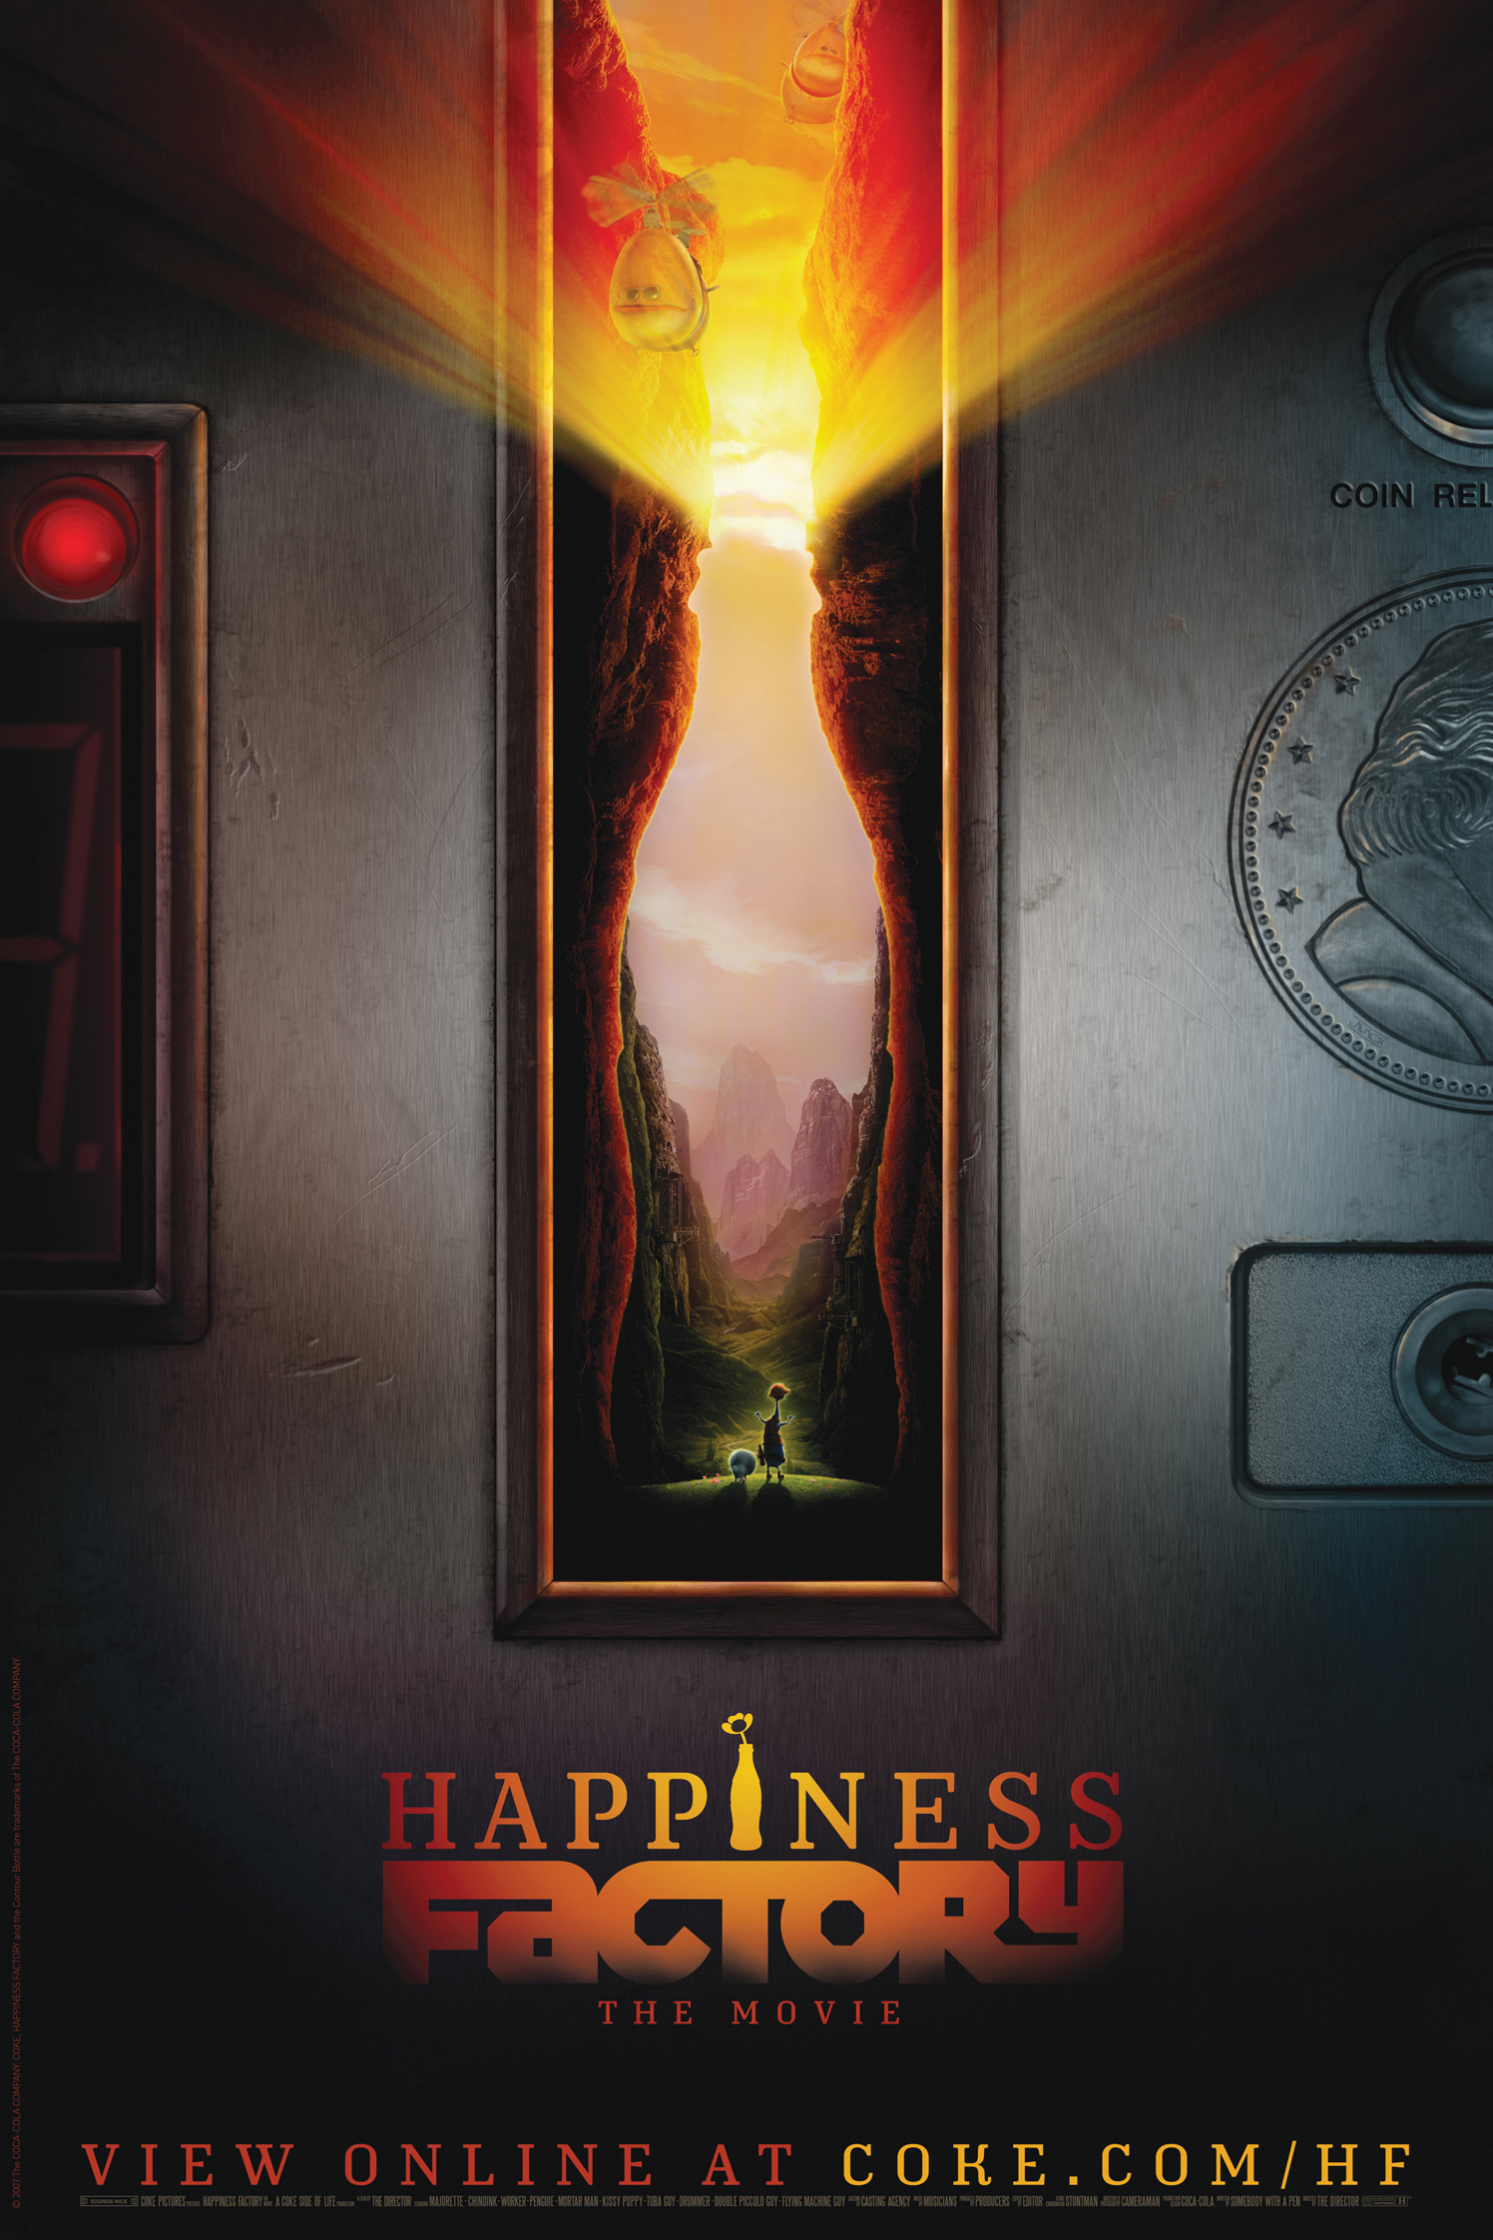 Coca Cola Happiness Factory the Movie Keyhole